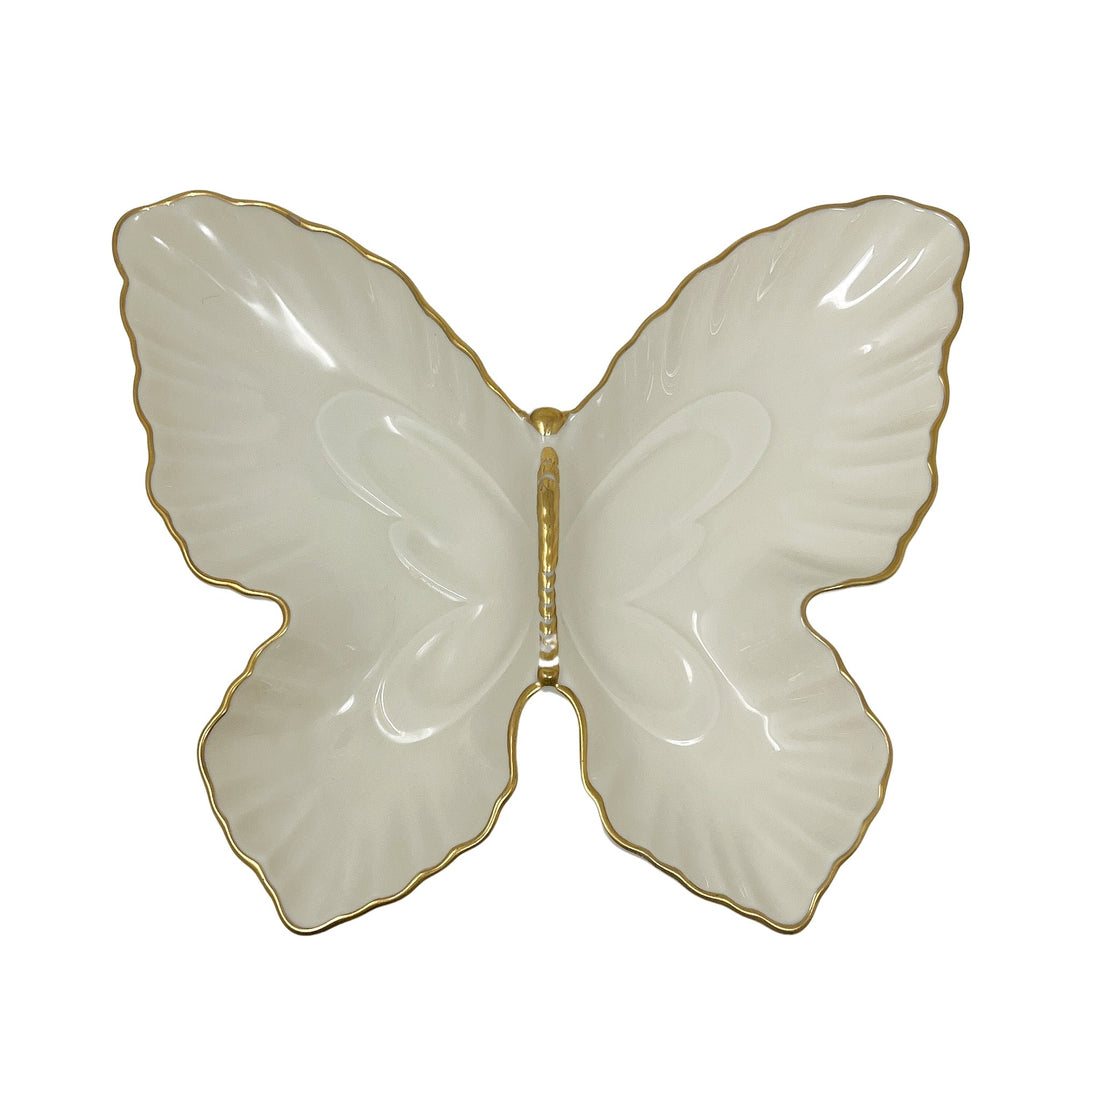 Vintage Lenox Butterfly Candy Dish